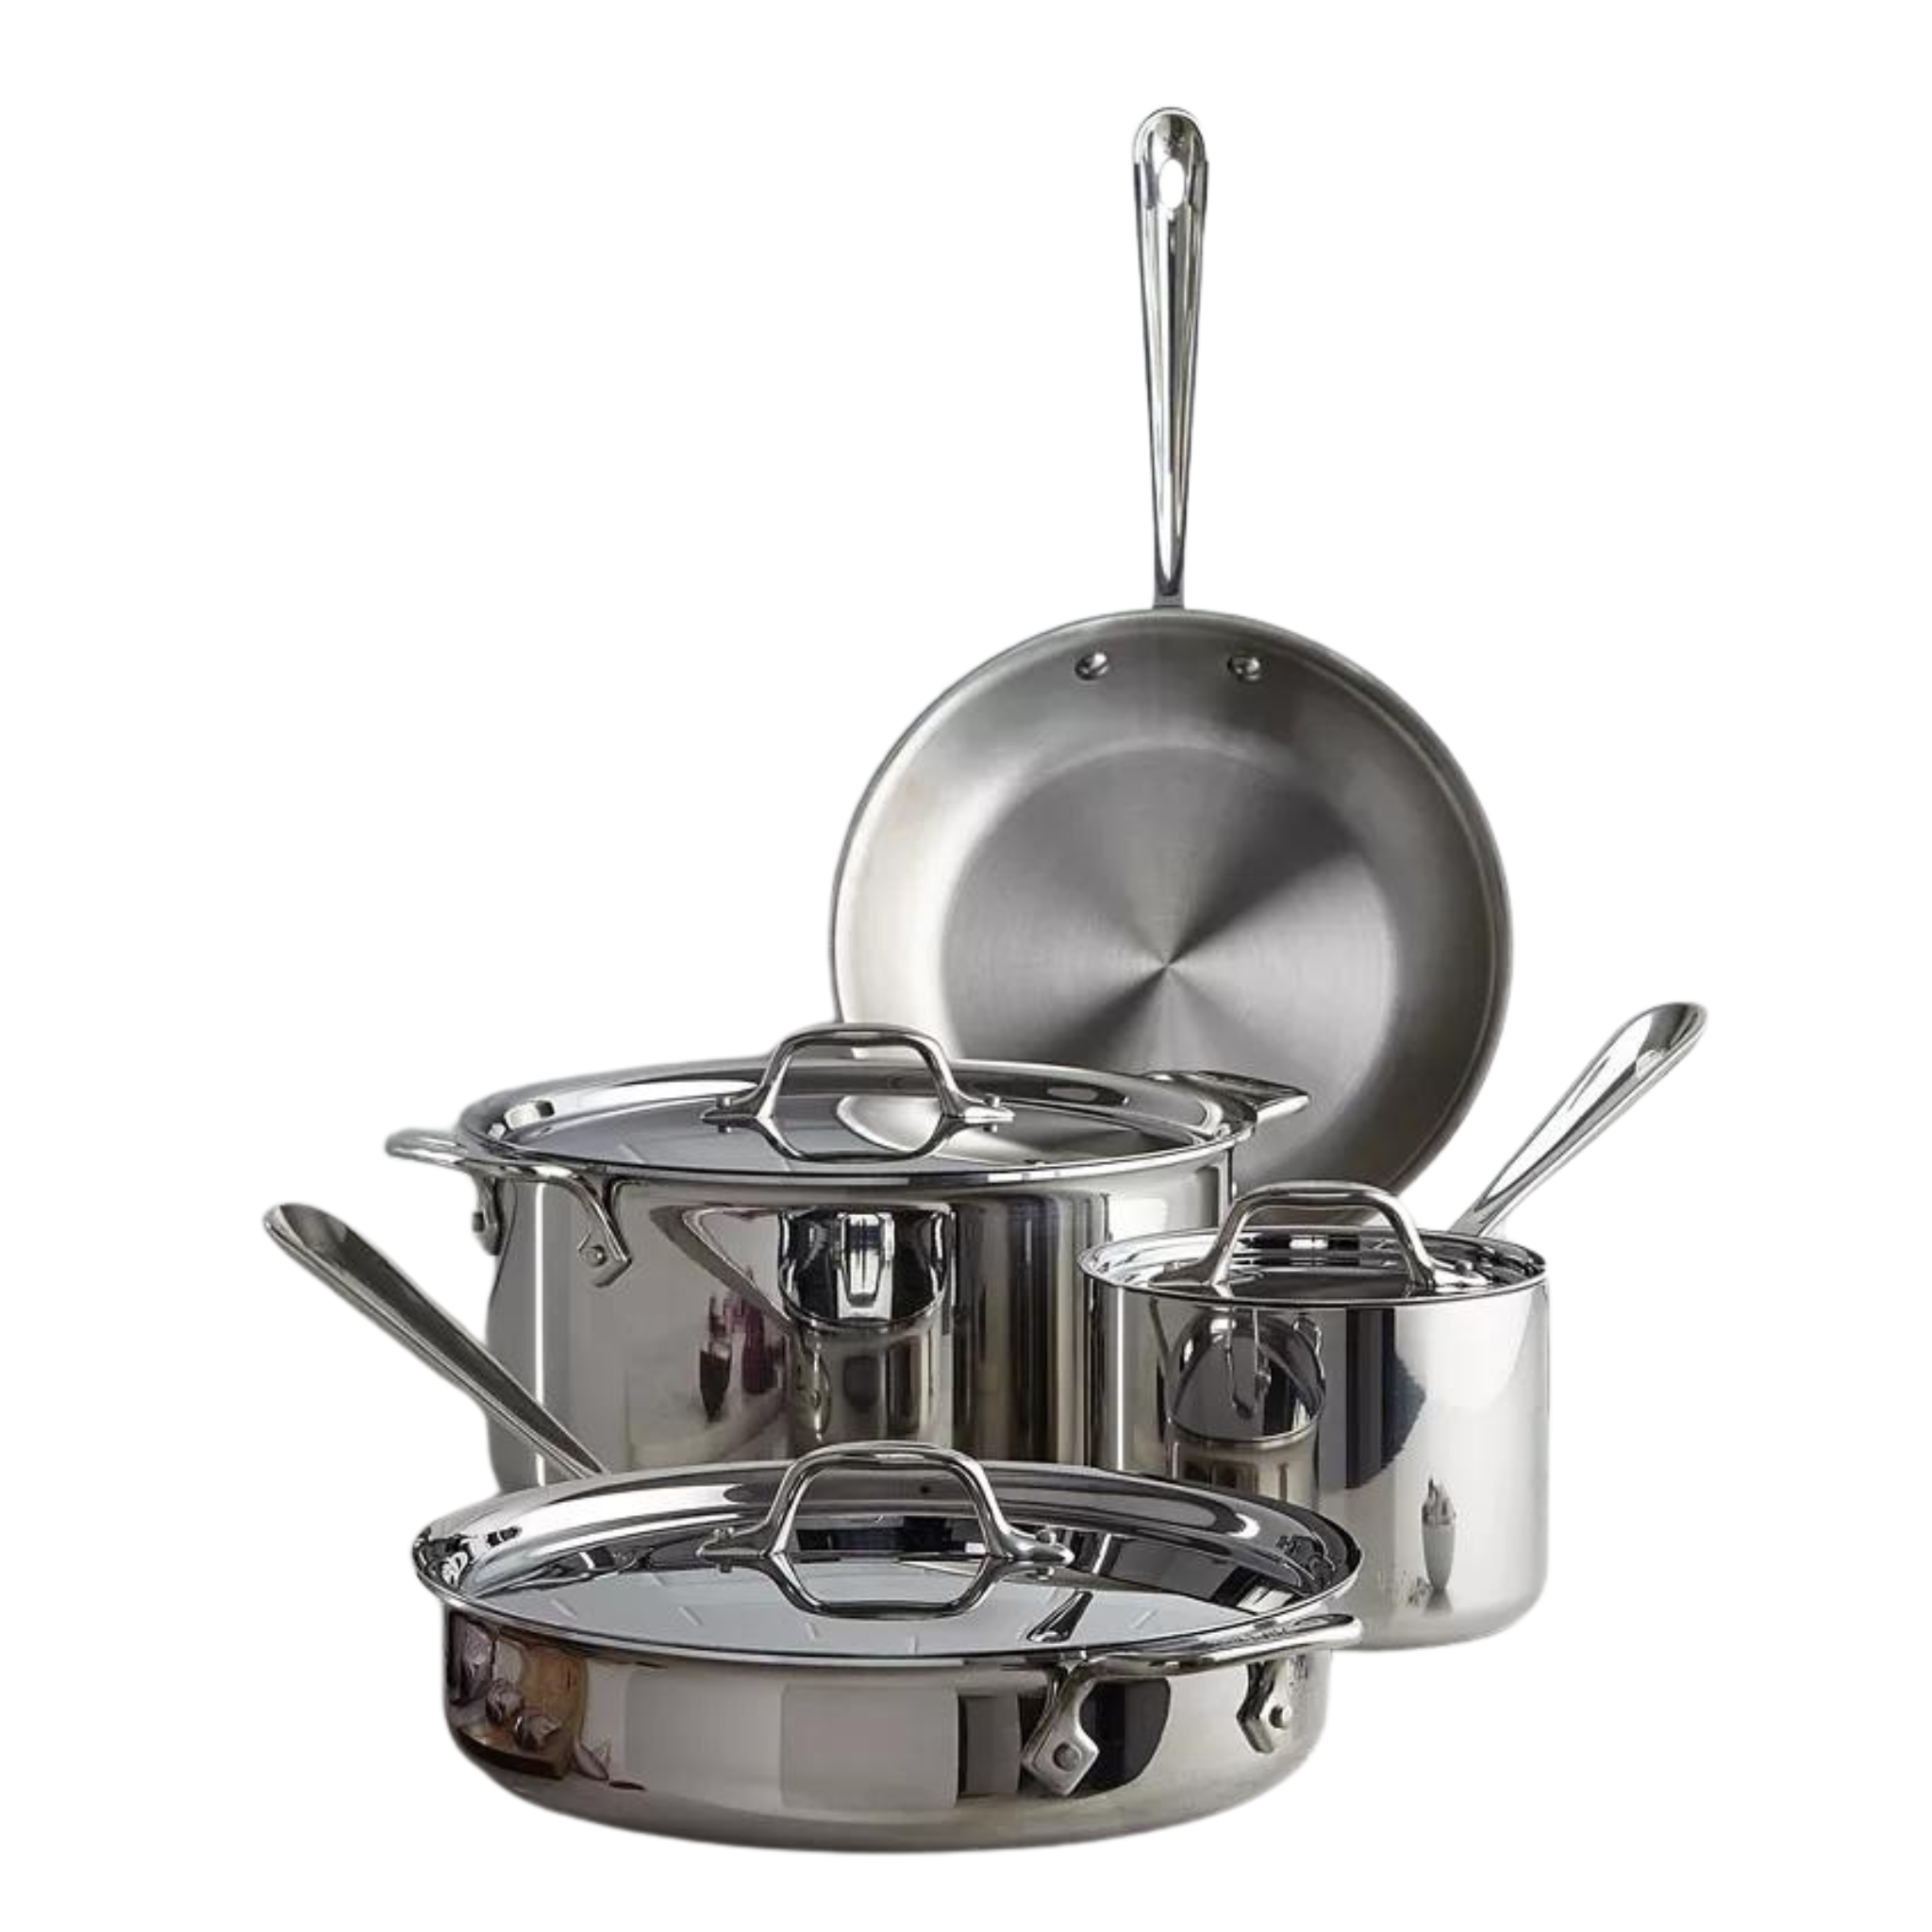 All-Clad D3 3-Ply Stainless Steel 7 Piece Cookware Set